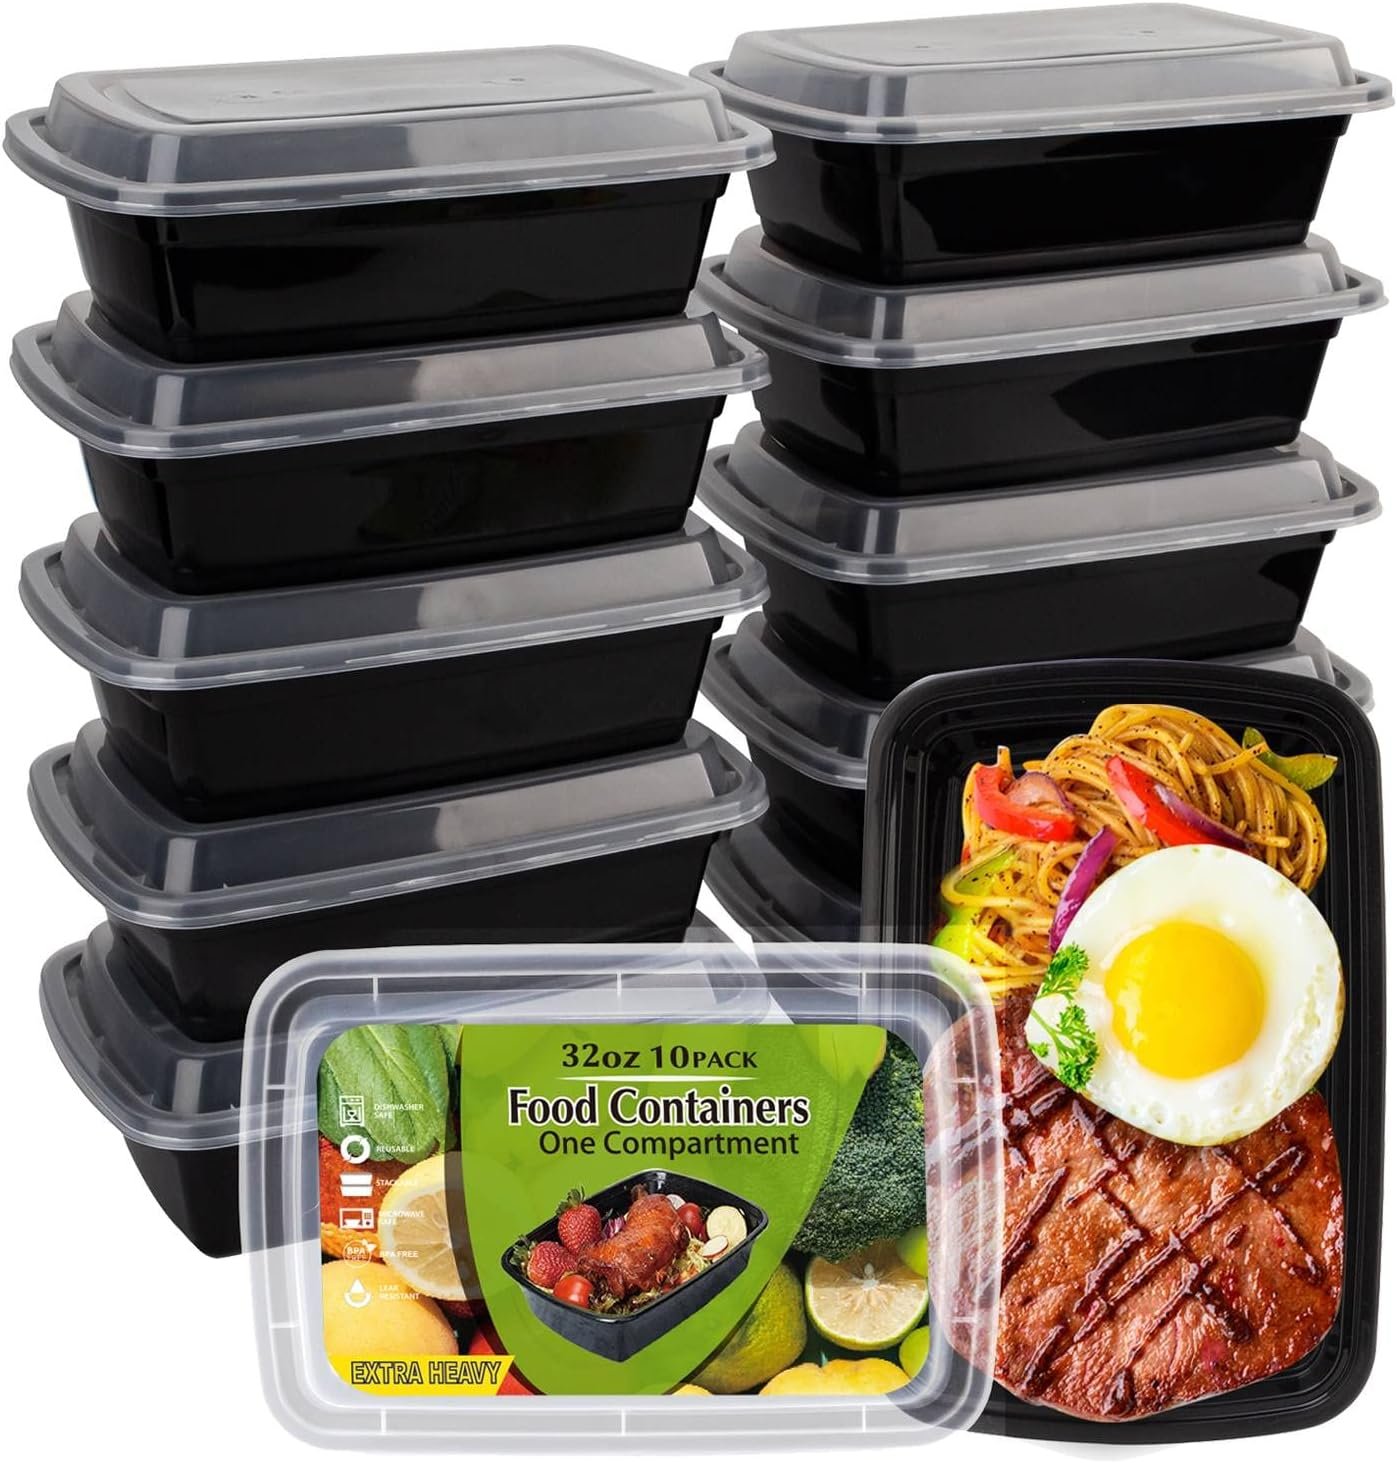 Meal Prep Containers Review